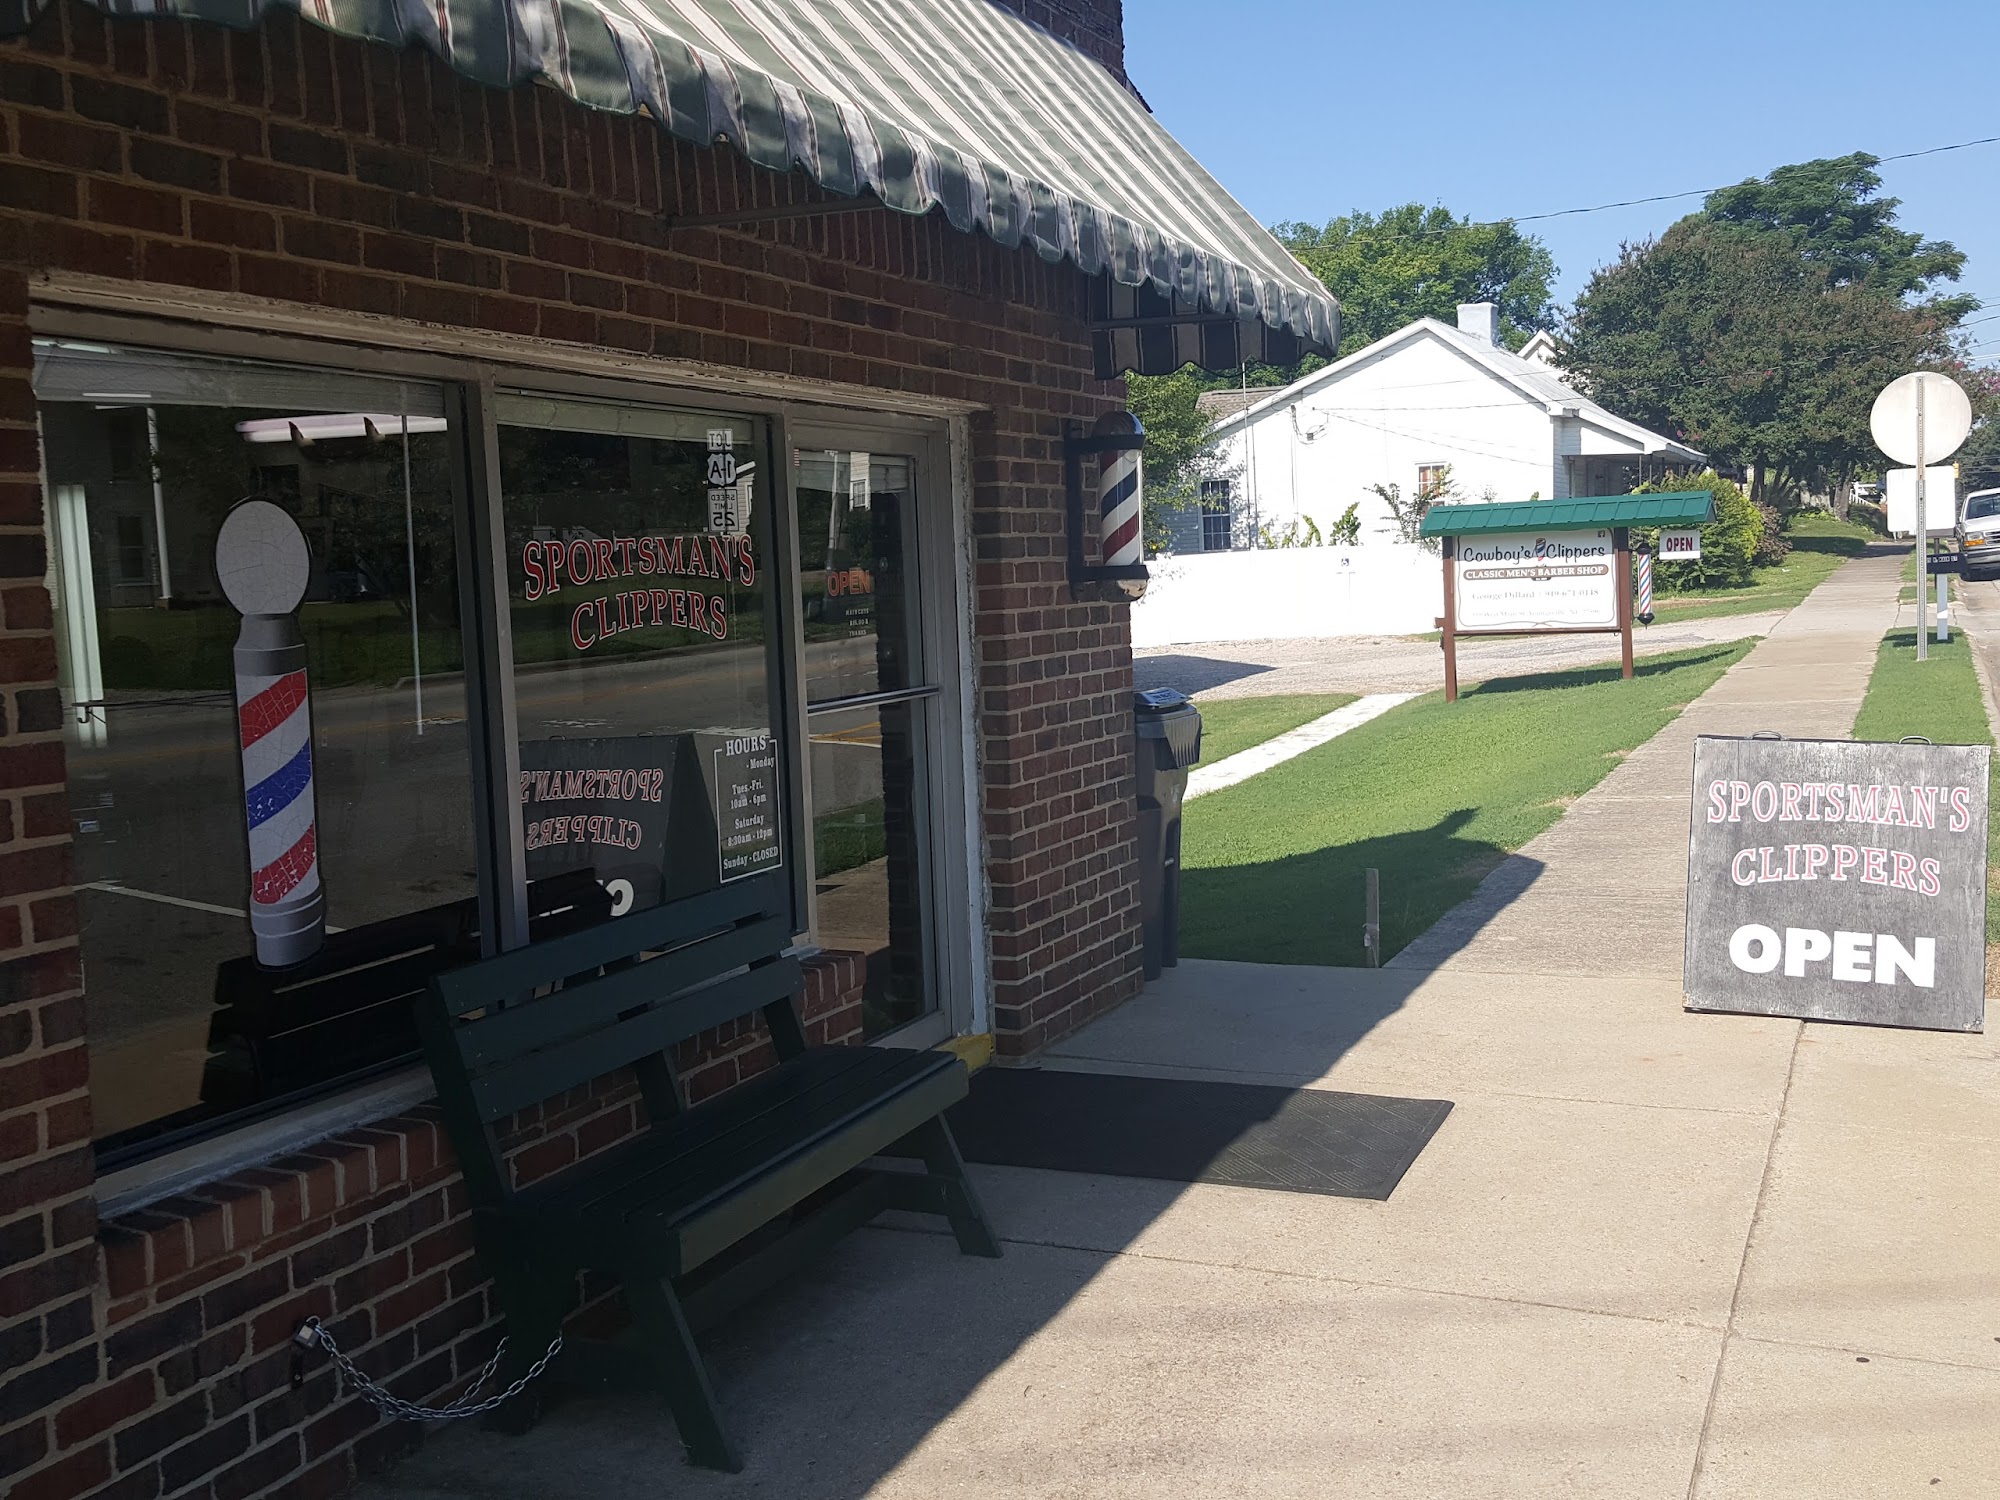 Sportsman's Clippers (walk-in only) 117 W Main St, Youngsville North Carolina 27596